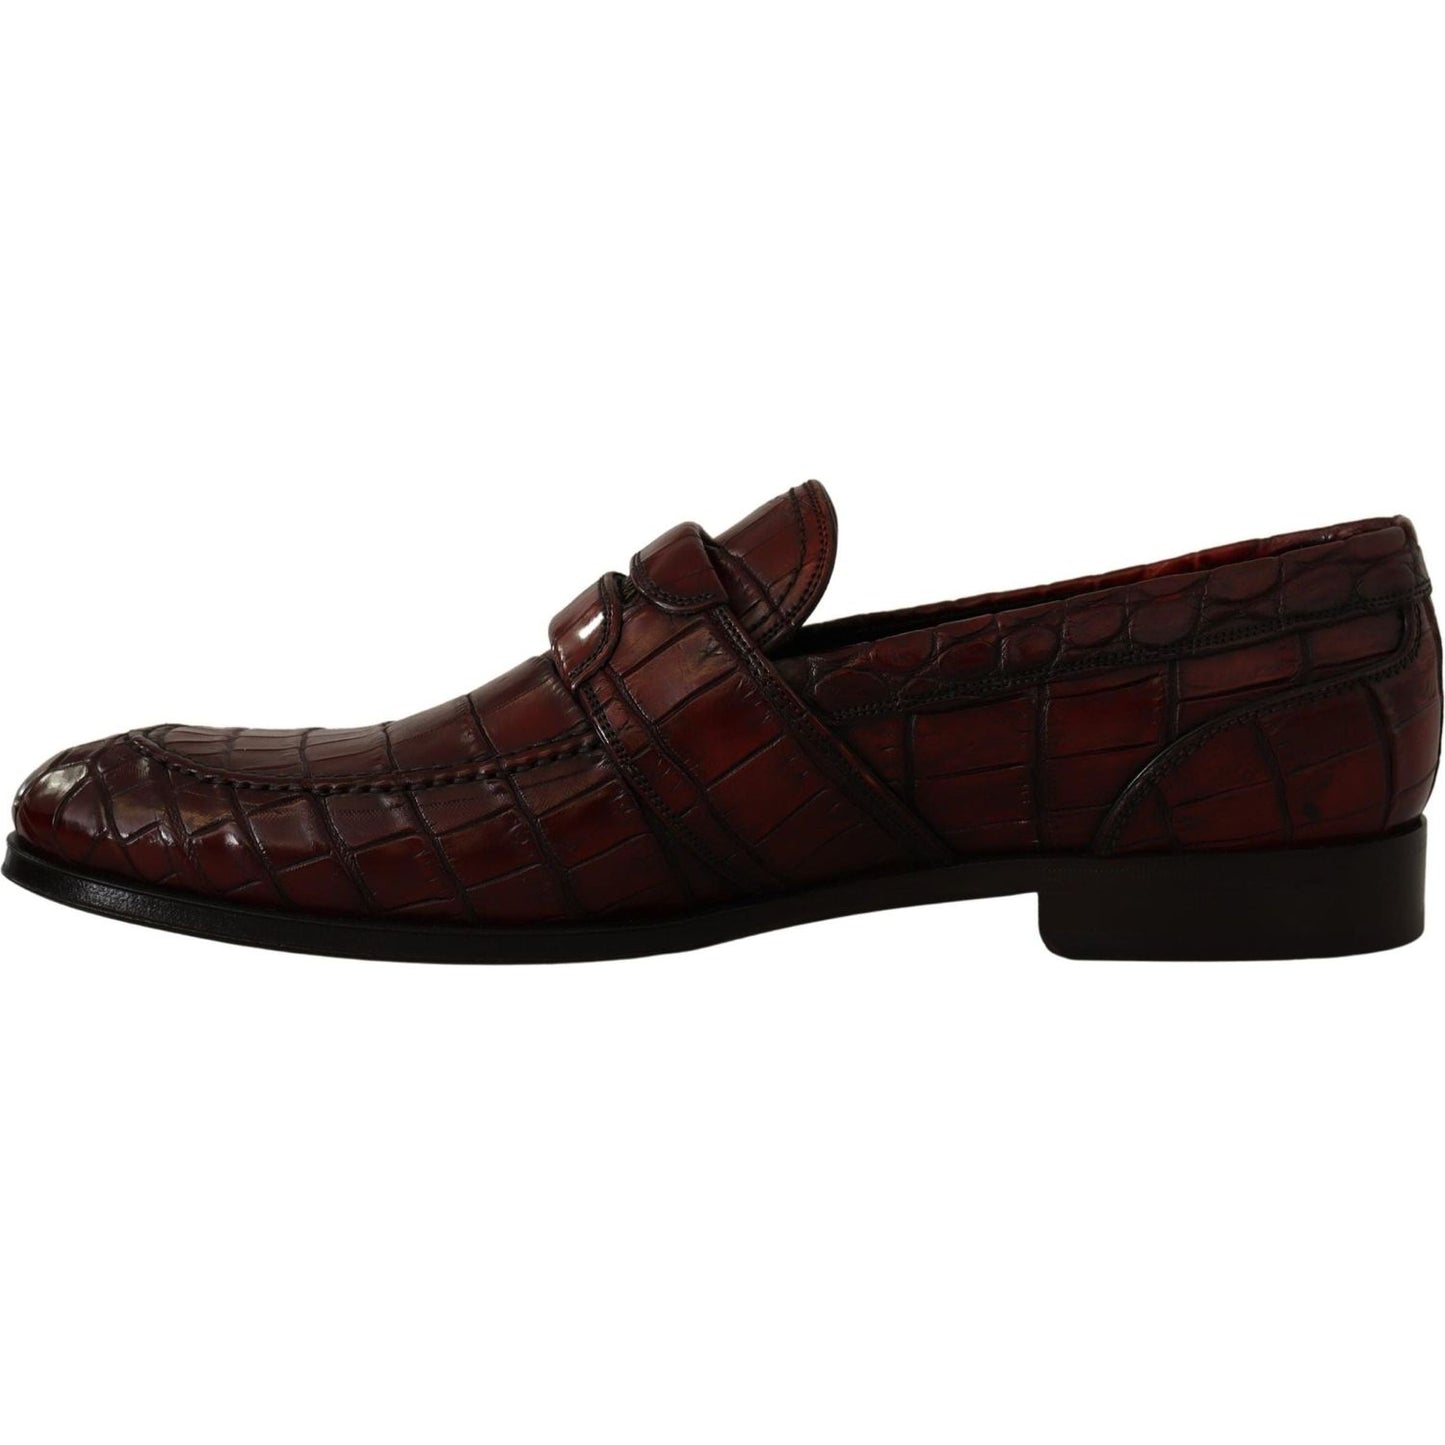 Dolce & Gabbana Exotic Croc Leather Bordeaux Loafers bordeaux-exotic-leather-dress-derby-shoes IMG_2084-scaled-2bacf072-493.jpg